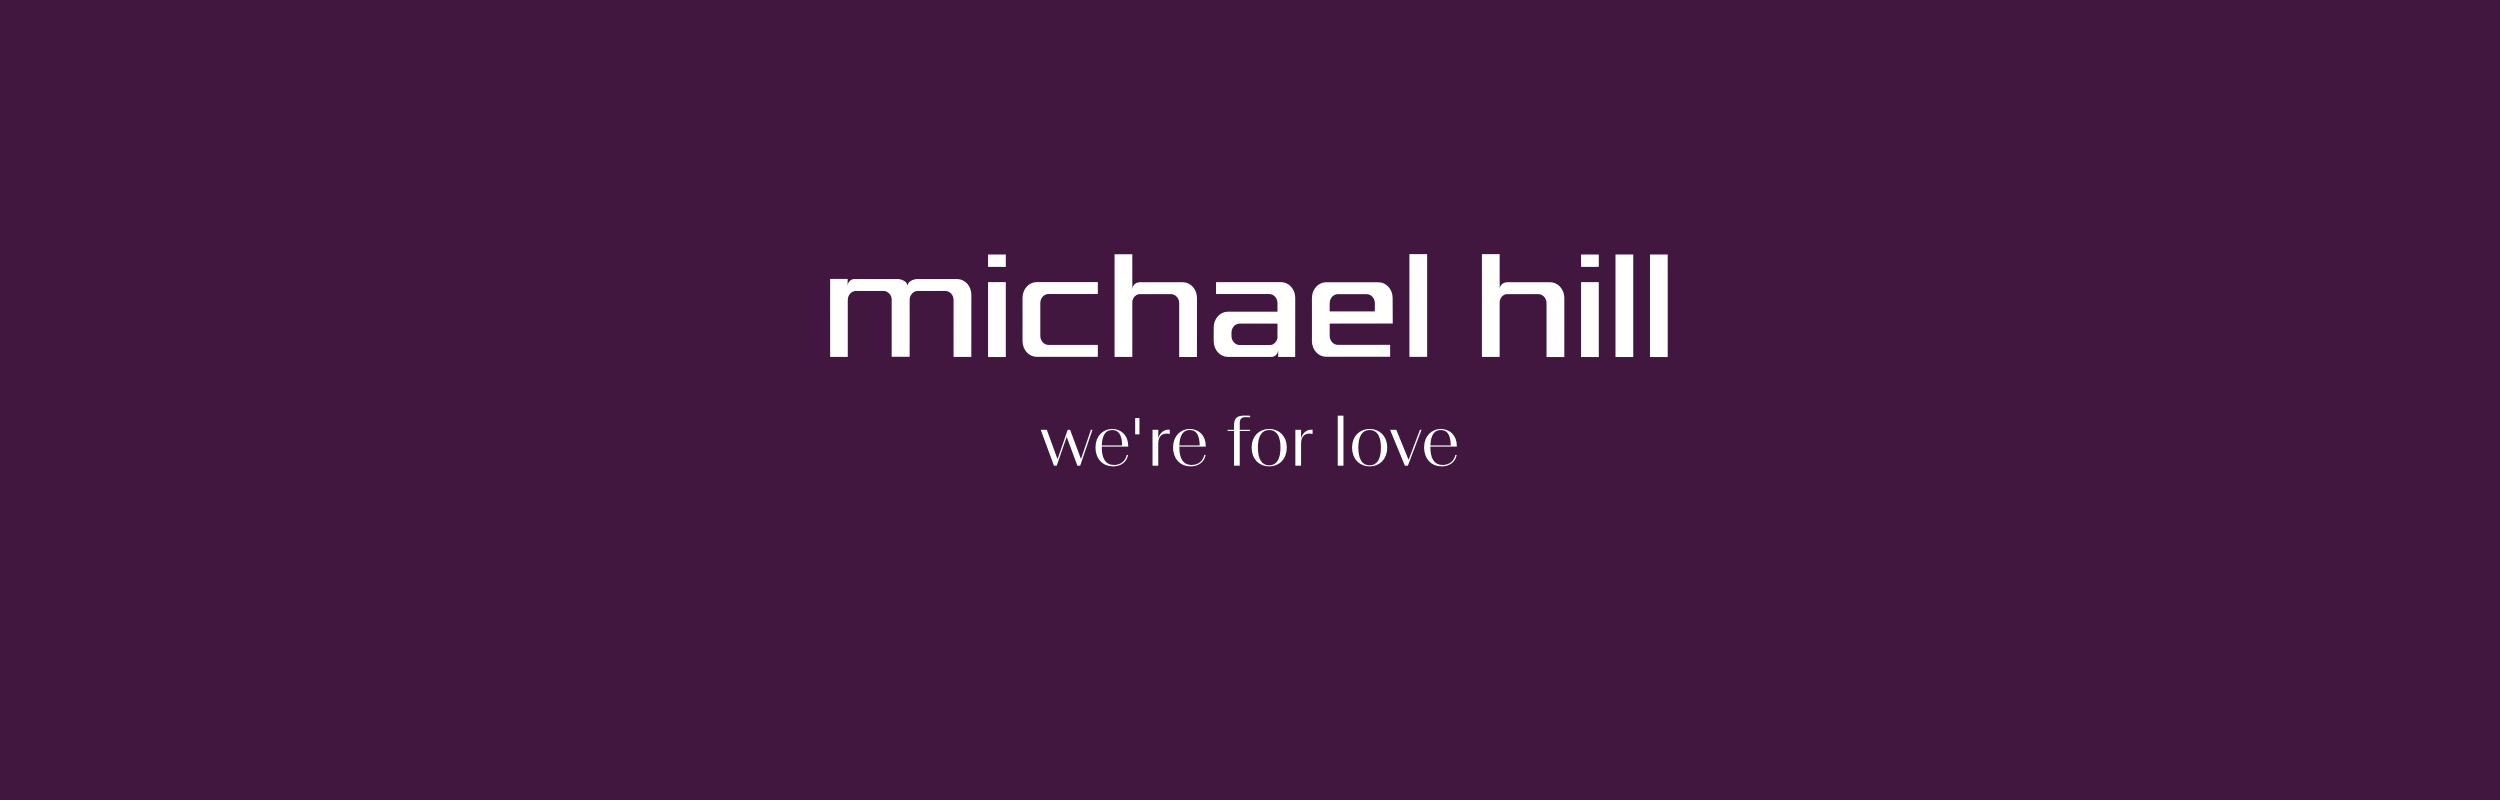 We're for Love at Michael Hill 